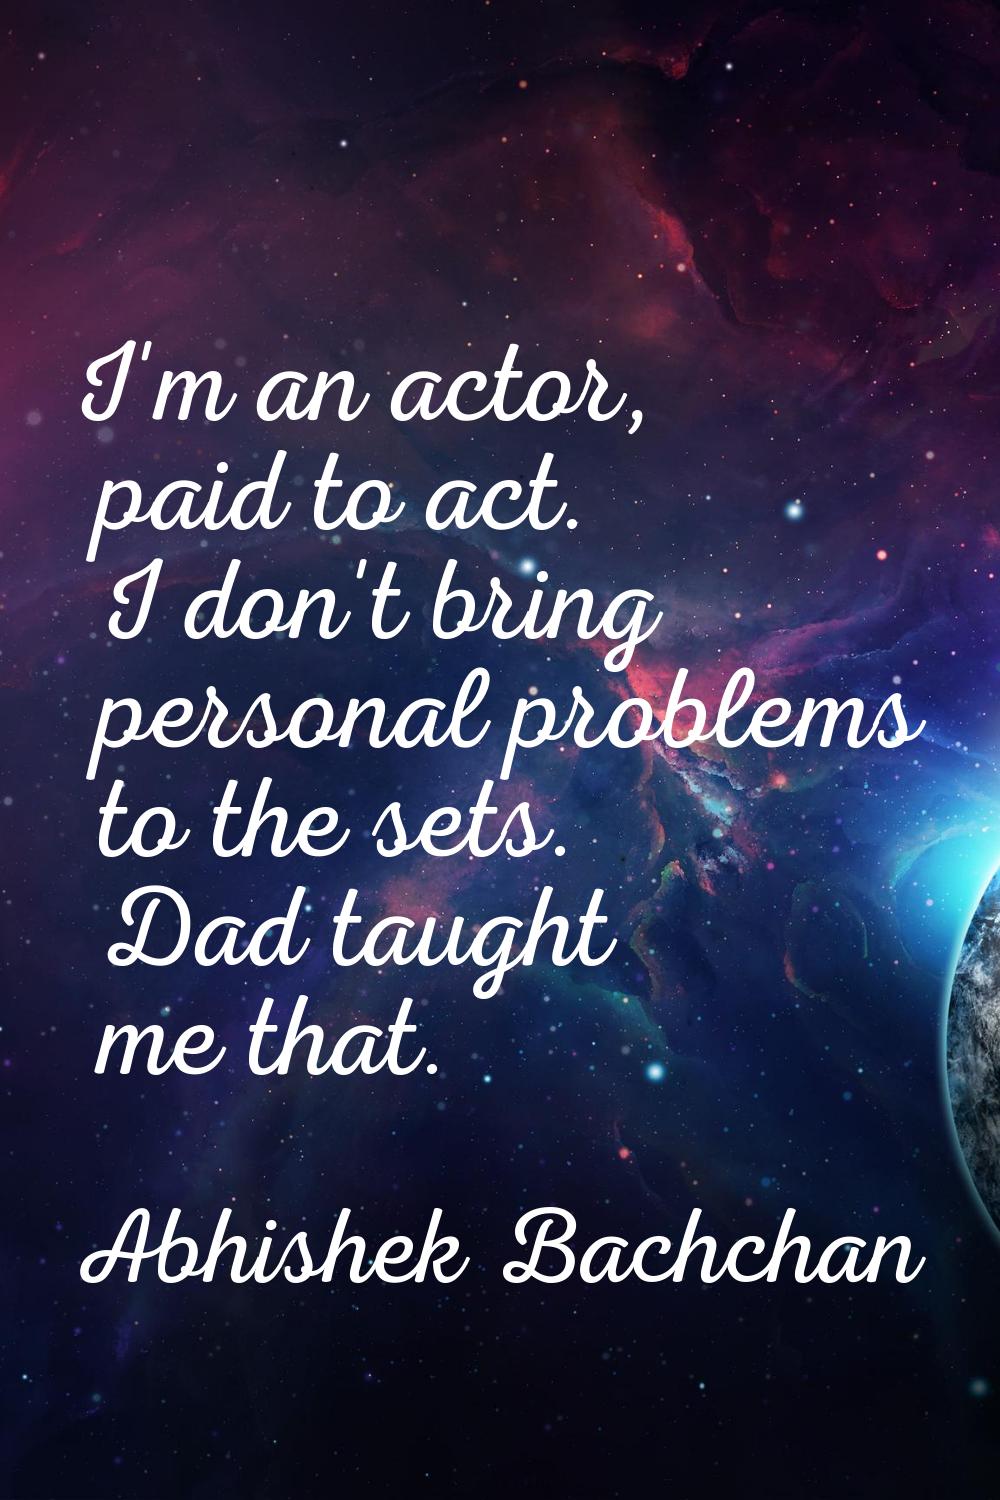 I'm an actor, paid to act. I don't bring personal problems to the sets. Dad taught me that.